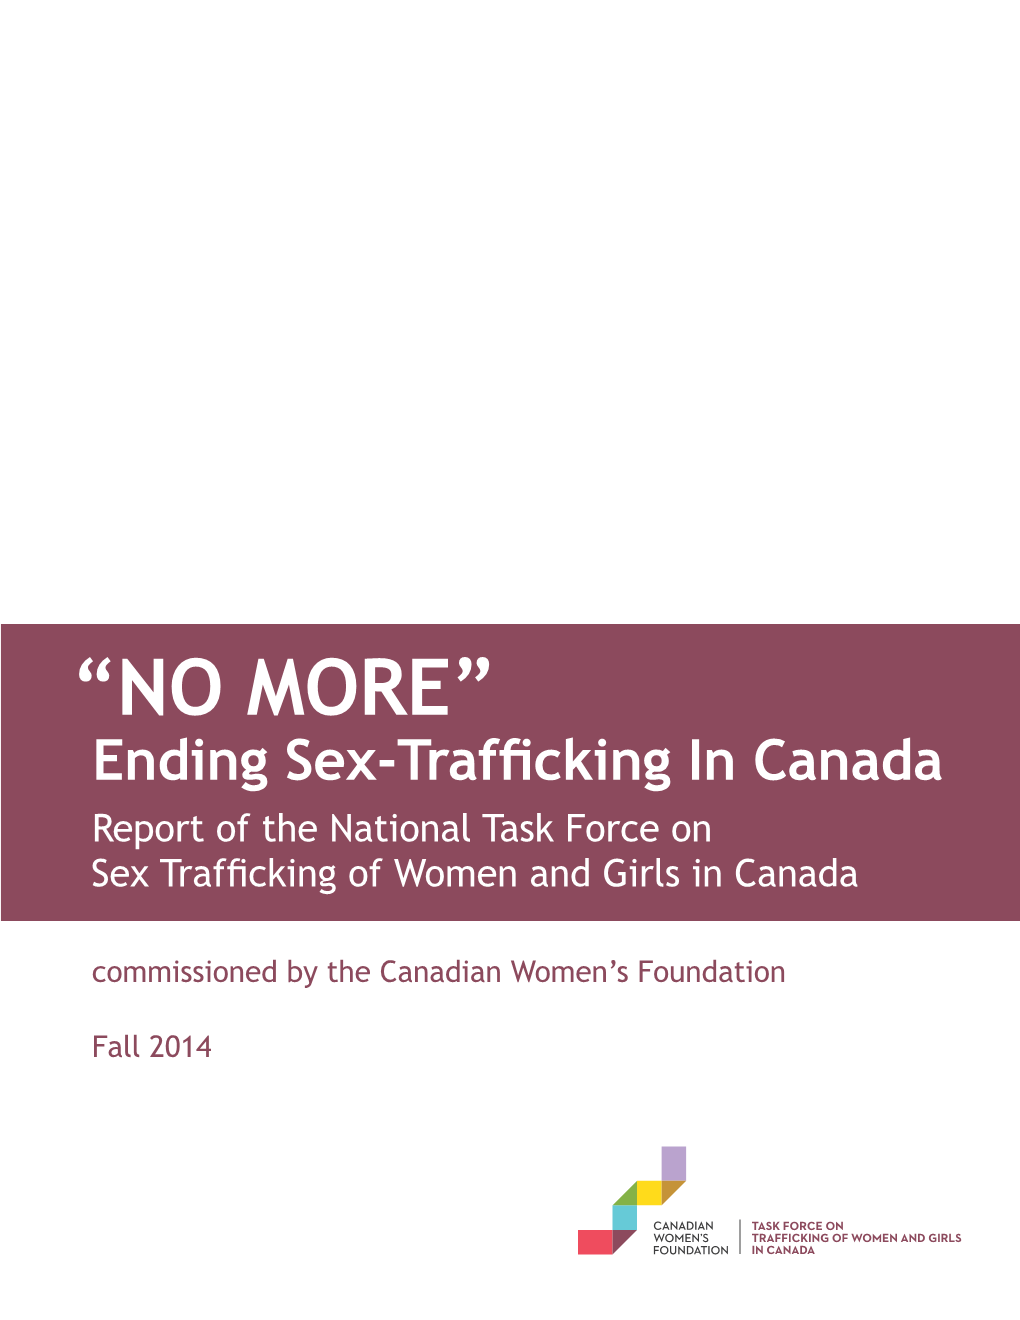 “NO MORE” Ending Sex Trafficking in Canada